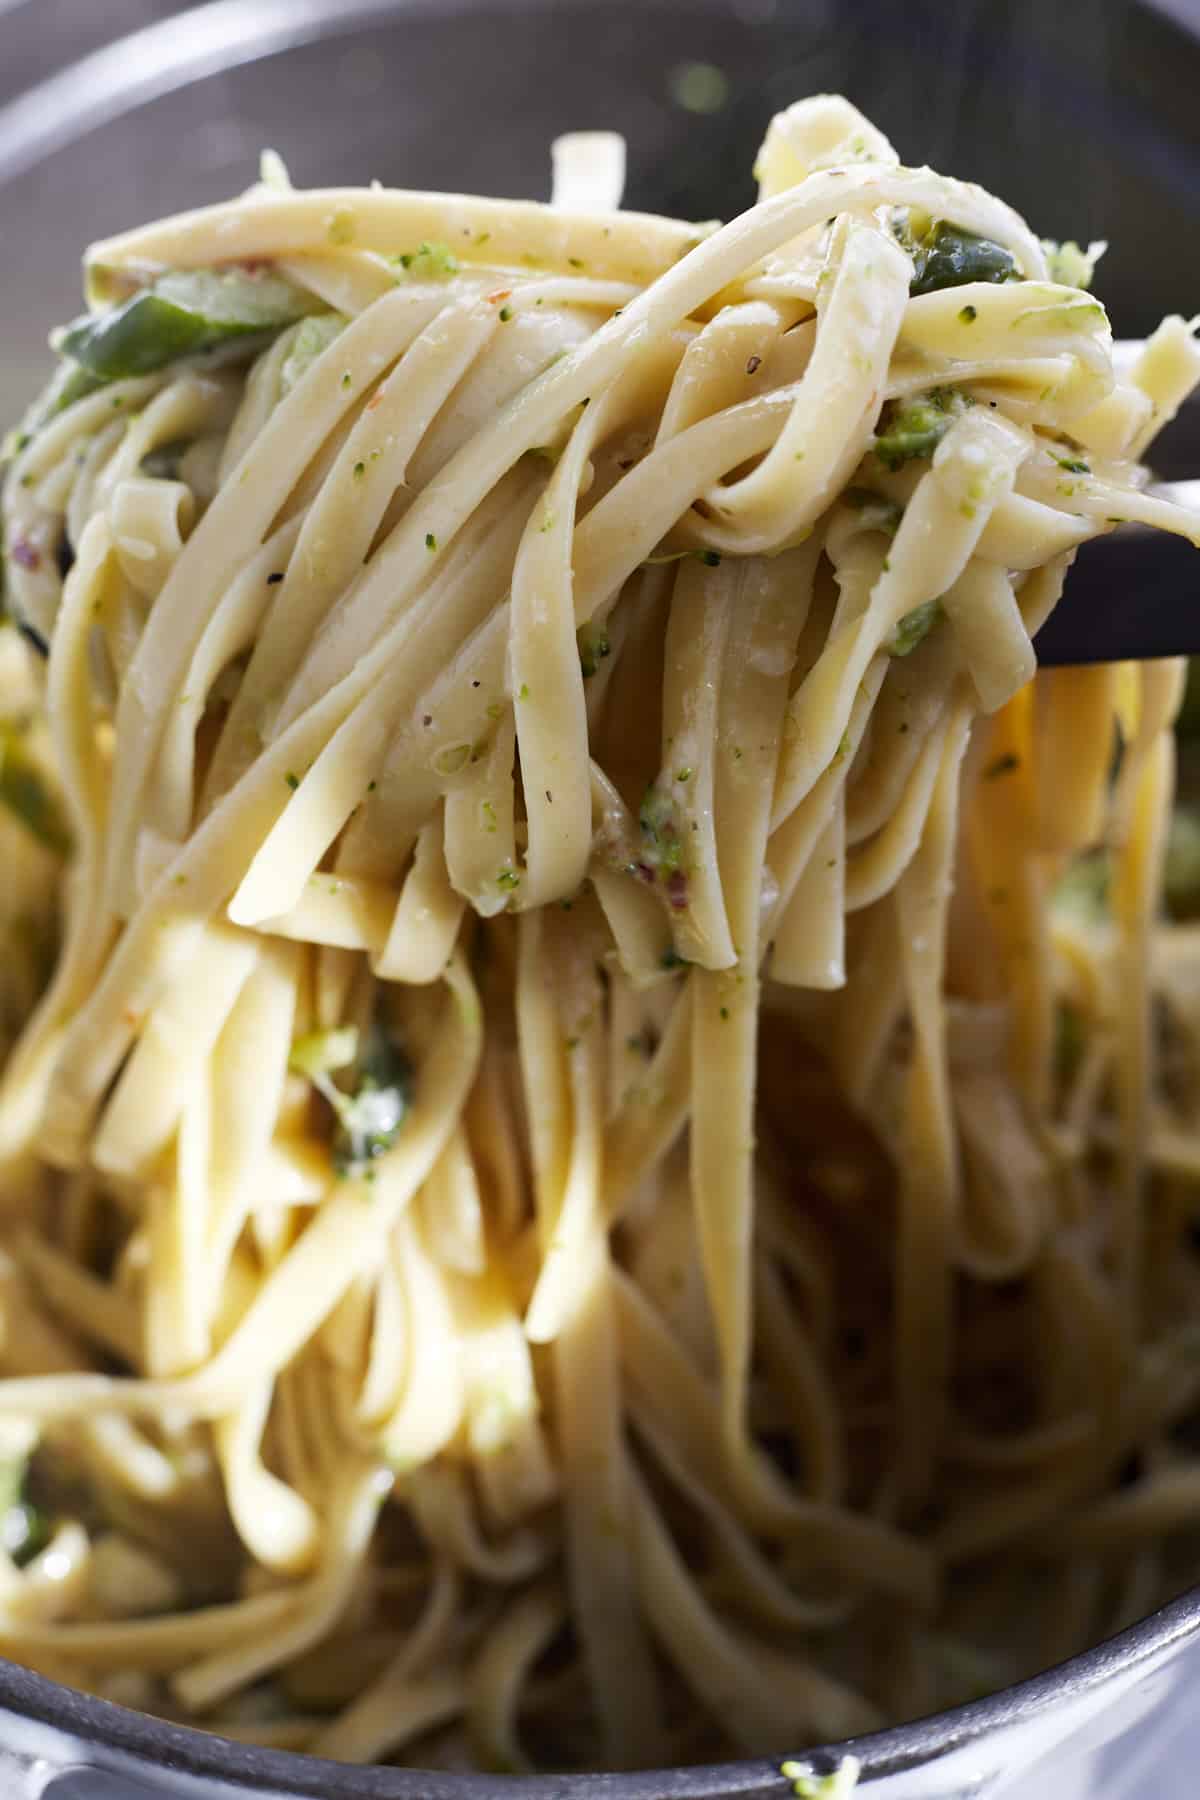 a serving of pasta with veggies being lifted with tongs